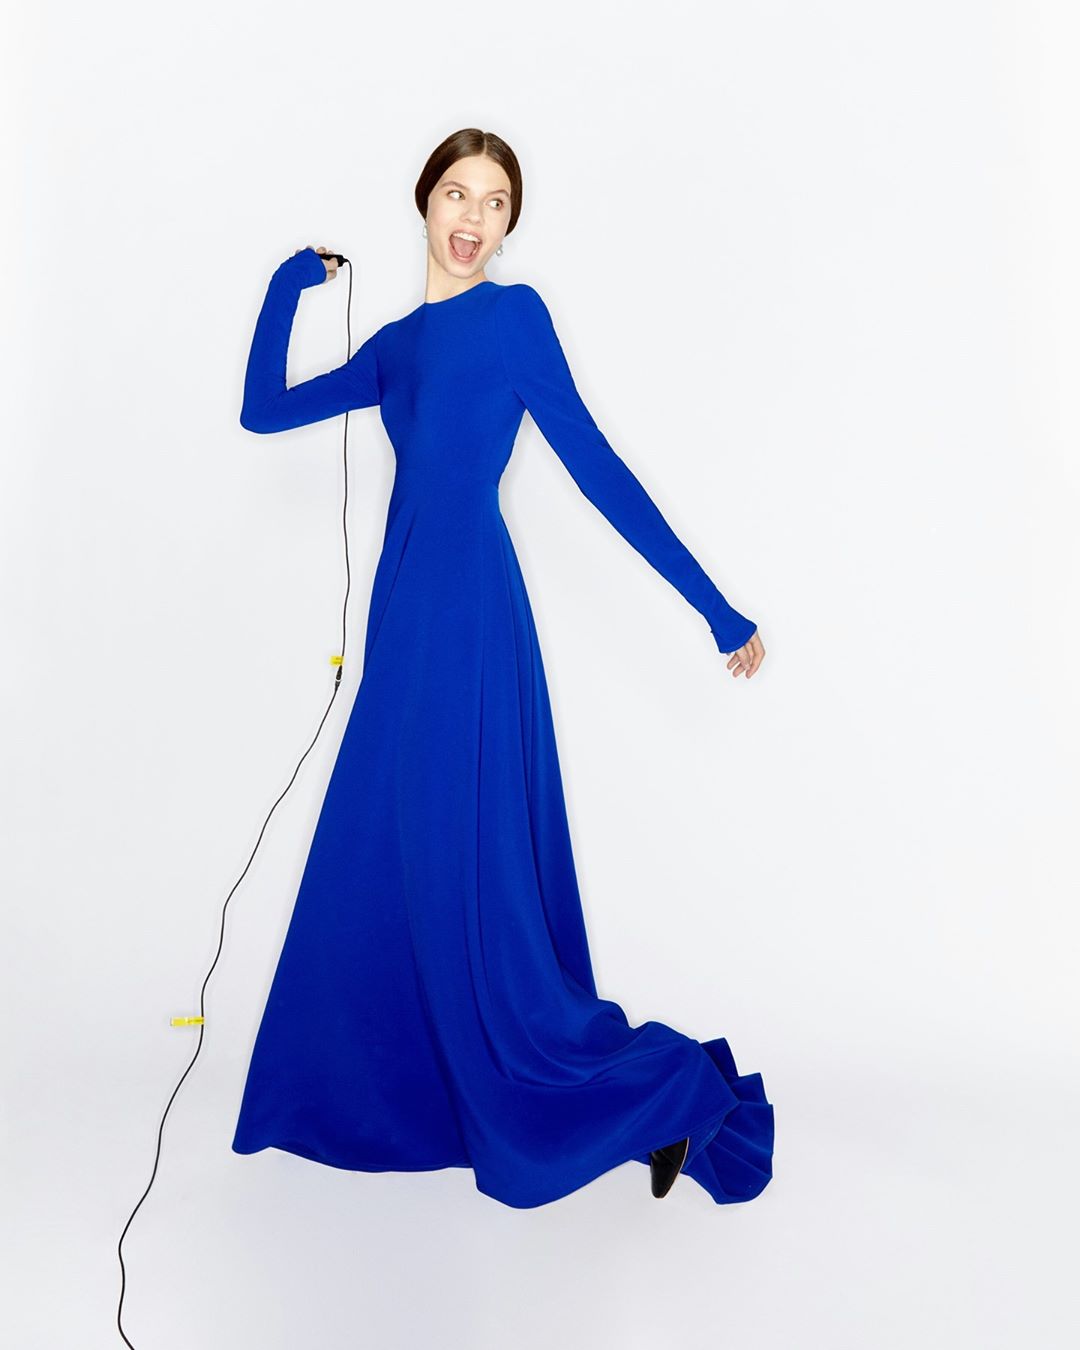 CAROLINA HERRERA - Ready, set, pose! Show your true colors in this nautilus blue gown from the Fall 2020 collection by Creative Director @wesgordon.
Photographer: @gorkapostigo
Production: @perfecto_m...